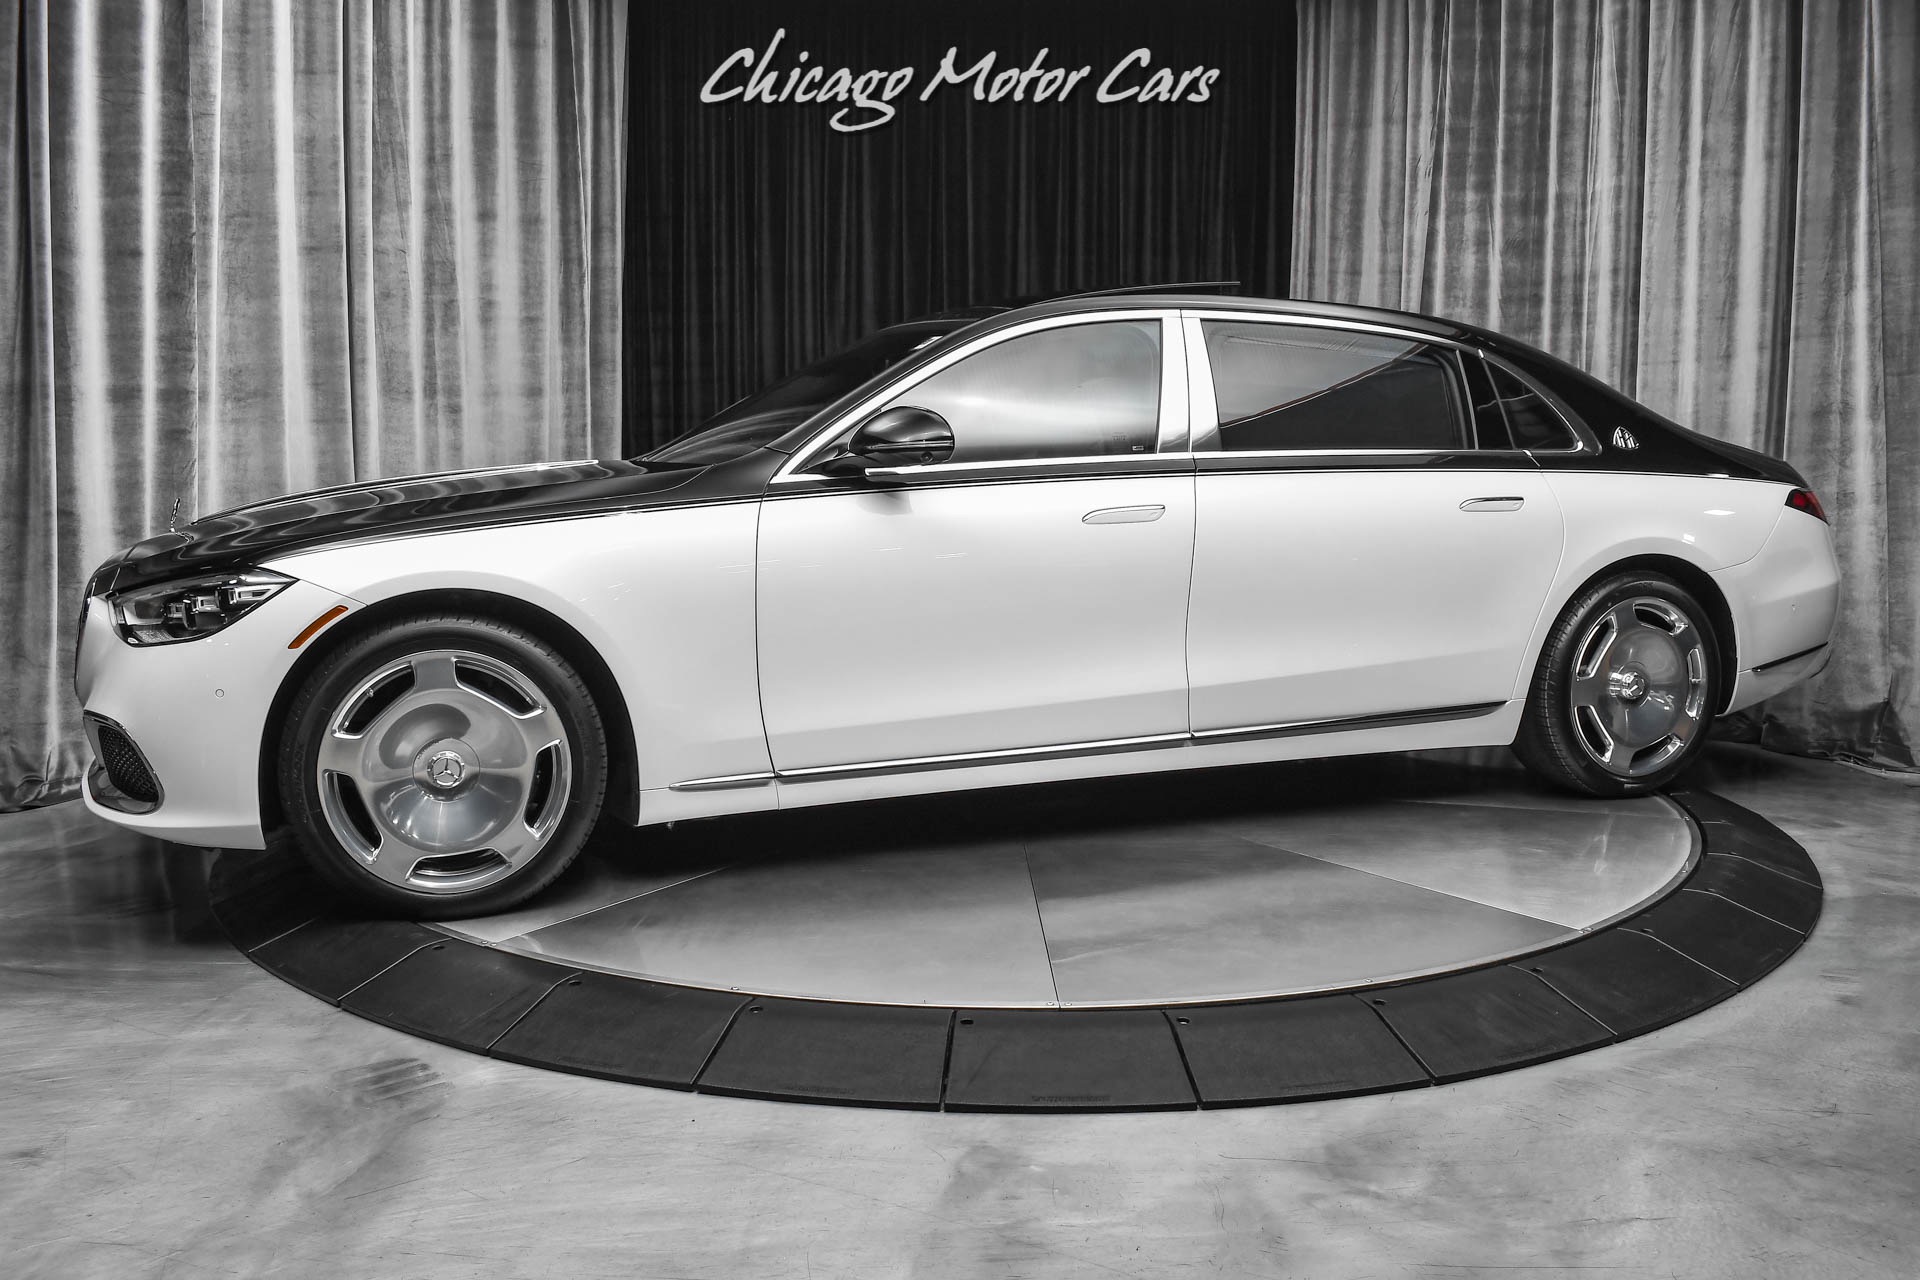 Used-2022-Mercedes-Benz-S580-Maybach-Maybach-S580-4Matic-Luxury-Sedan-Delivery-Miles-2-Tone-LOADED